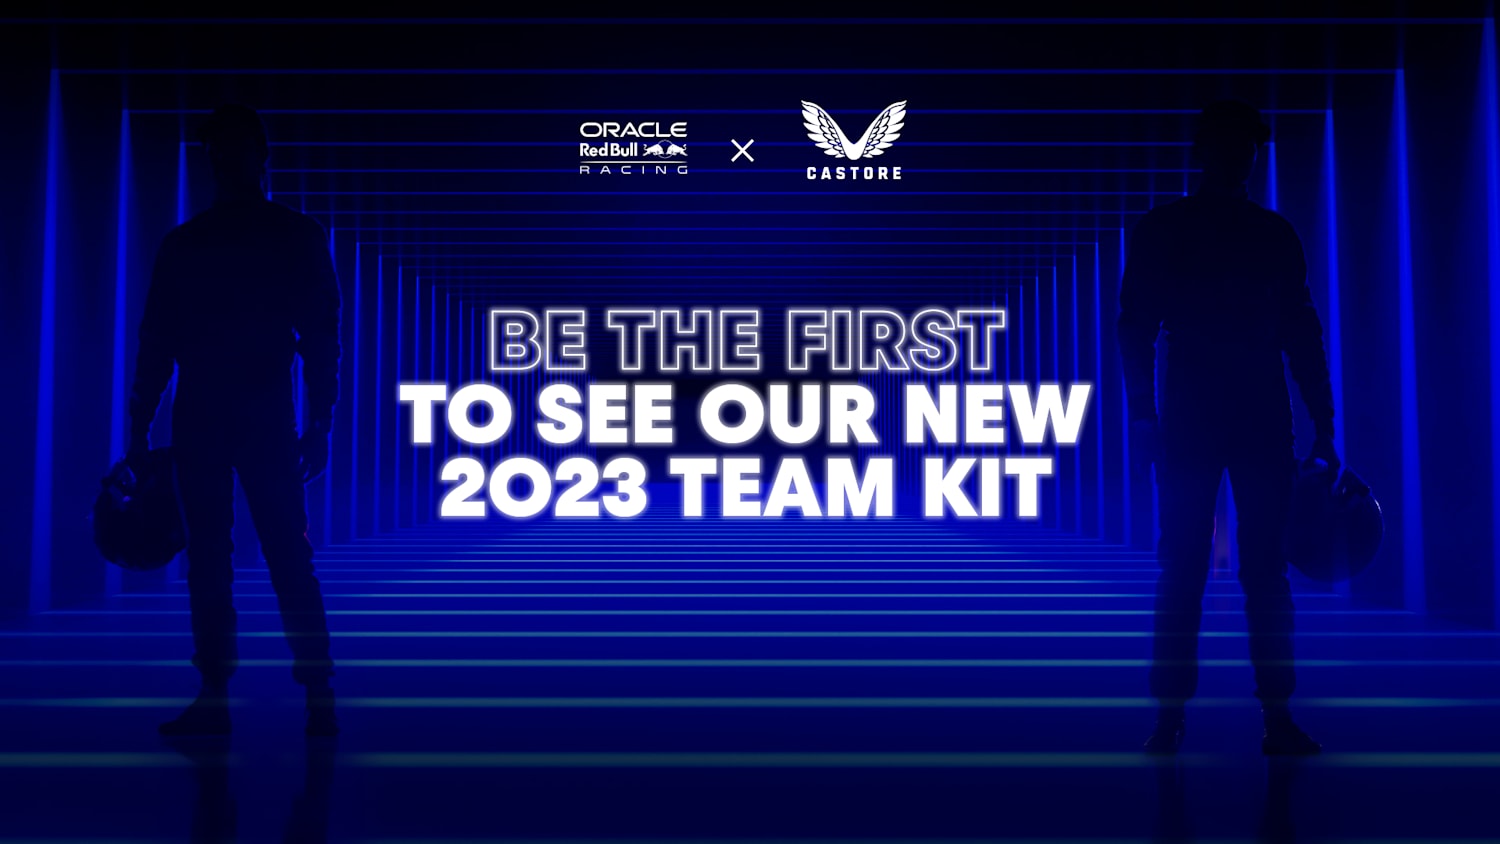 Join The Oracle Red Bull Racing 2023 Kit Launch